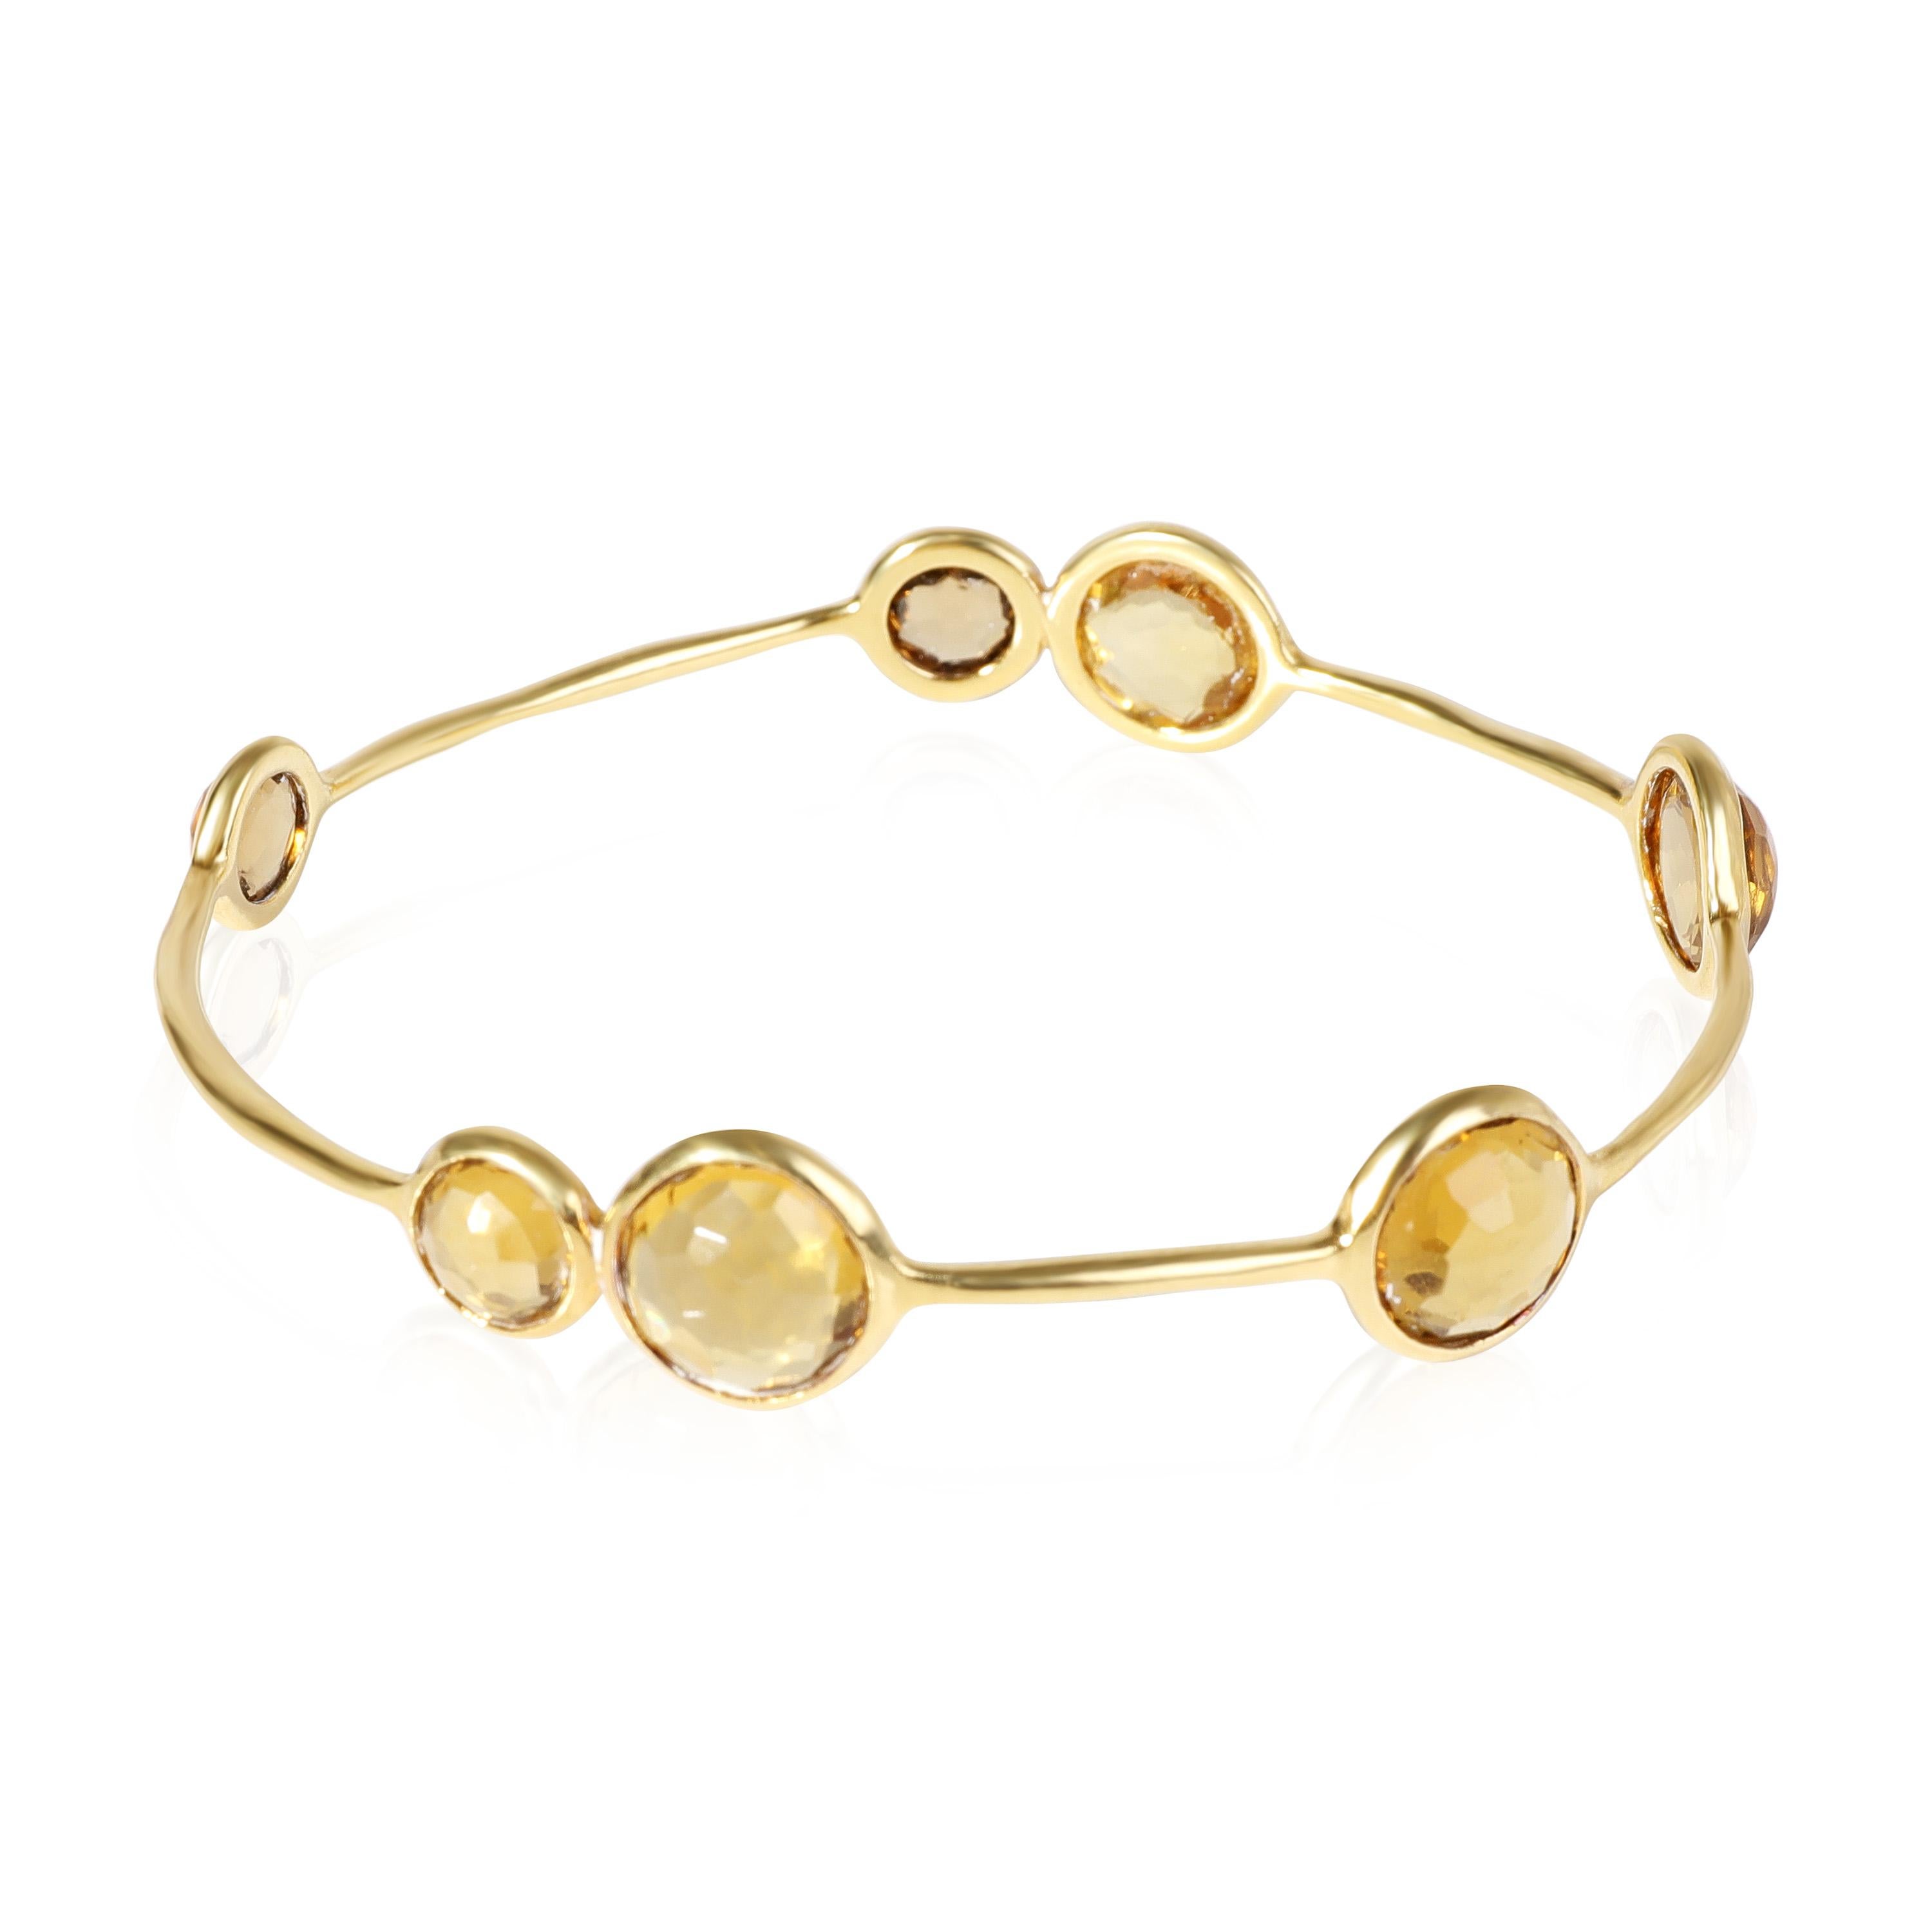 Ippolita Lollipop Citrine Bracelet in 18k Yellow Gold

PRIMARY DETAILS
SKU: 118854
Listing Title: Ippolita Lollipop Citrine Bracelet in 18k Yellow Gold
Condition Description: Retails for 2795 USD. In excellent condition and recently polished. Will